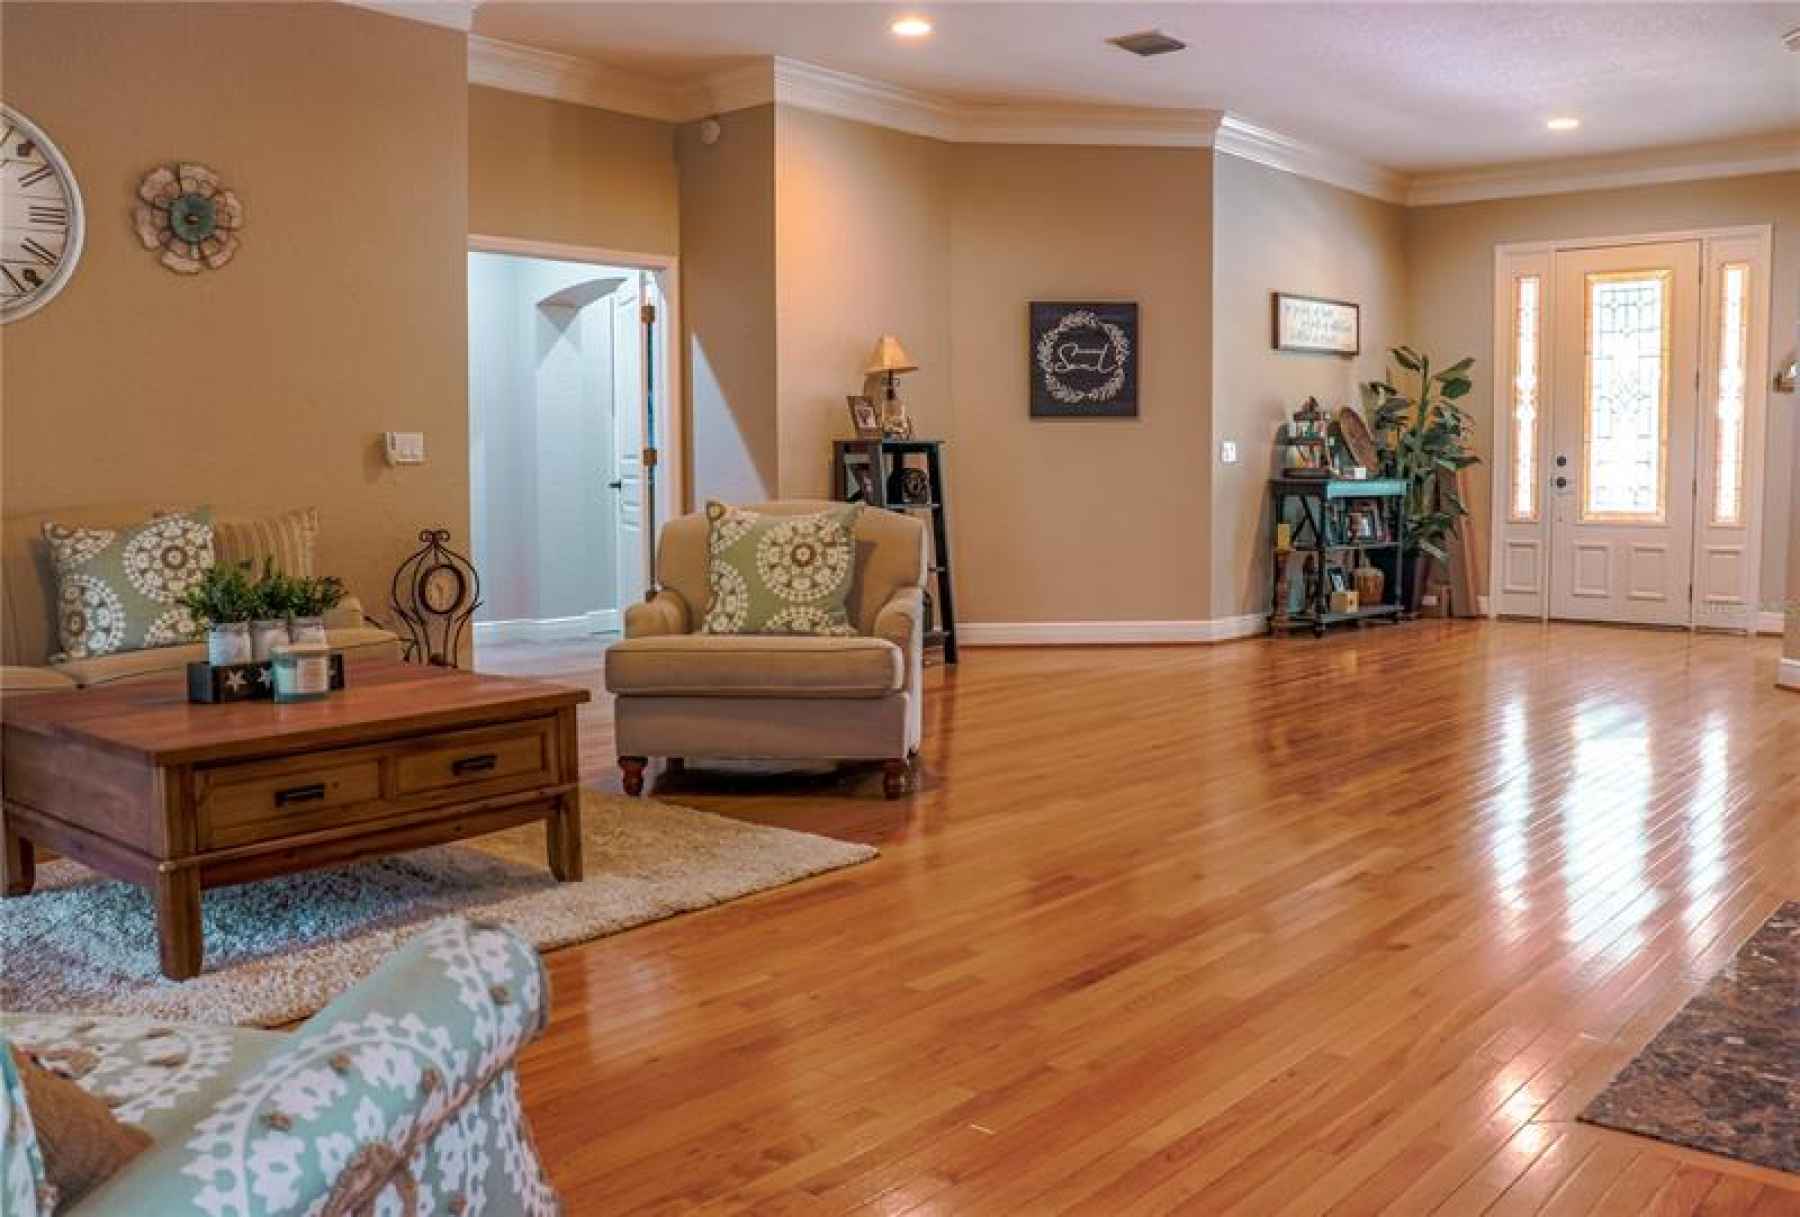 ENTRY LEADING TO FORMAL LIVING ROOM